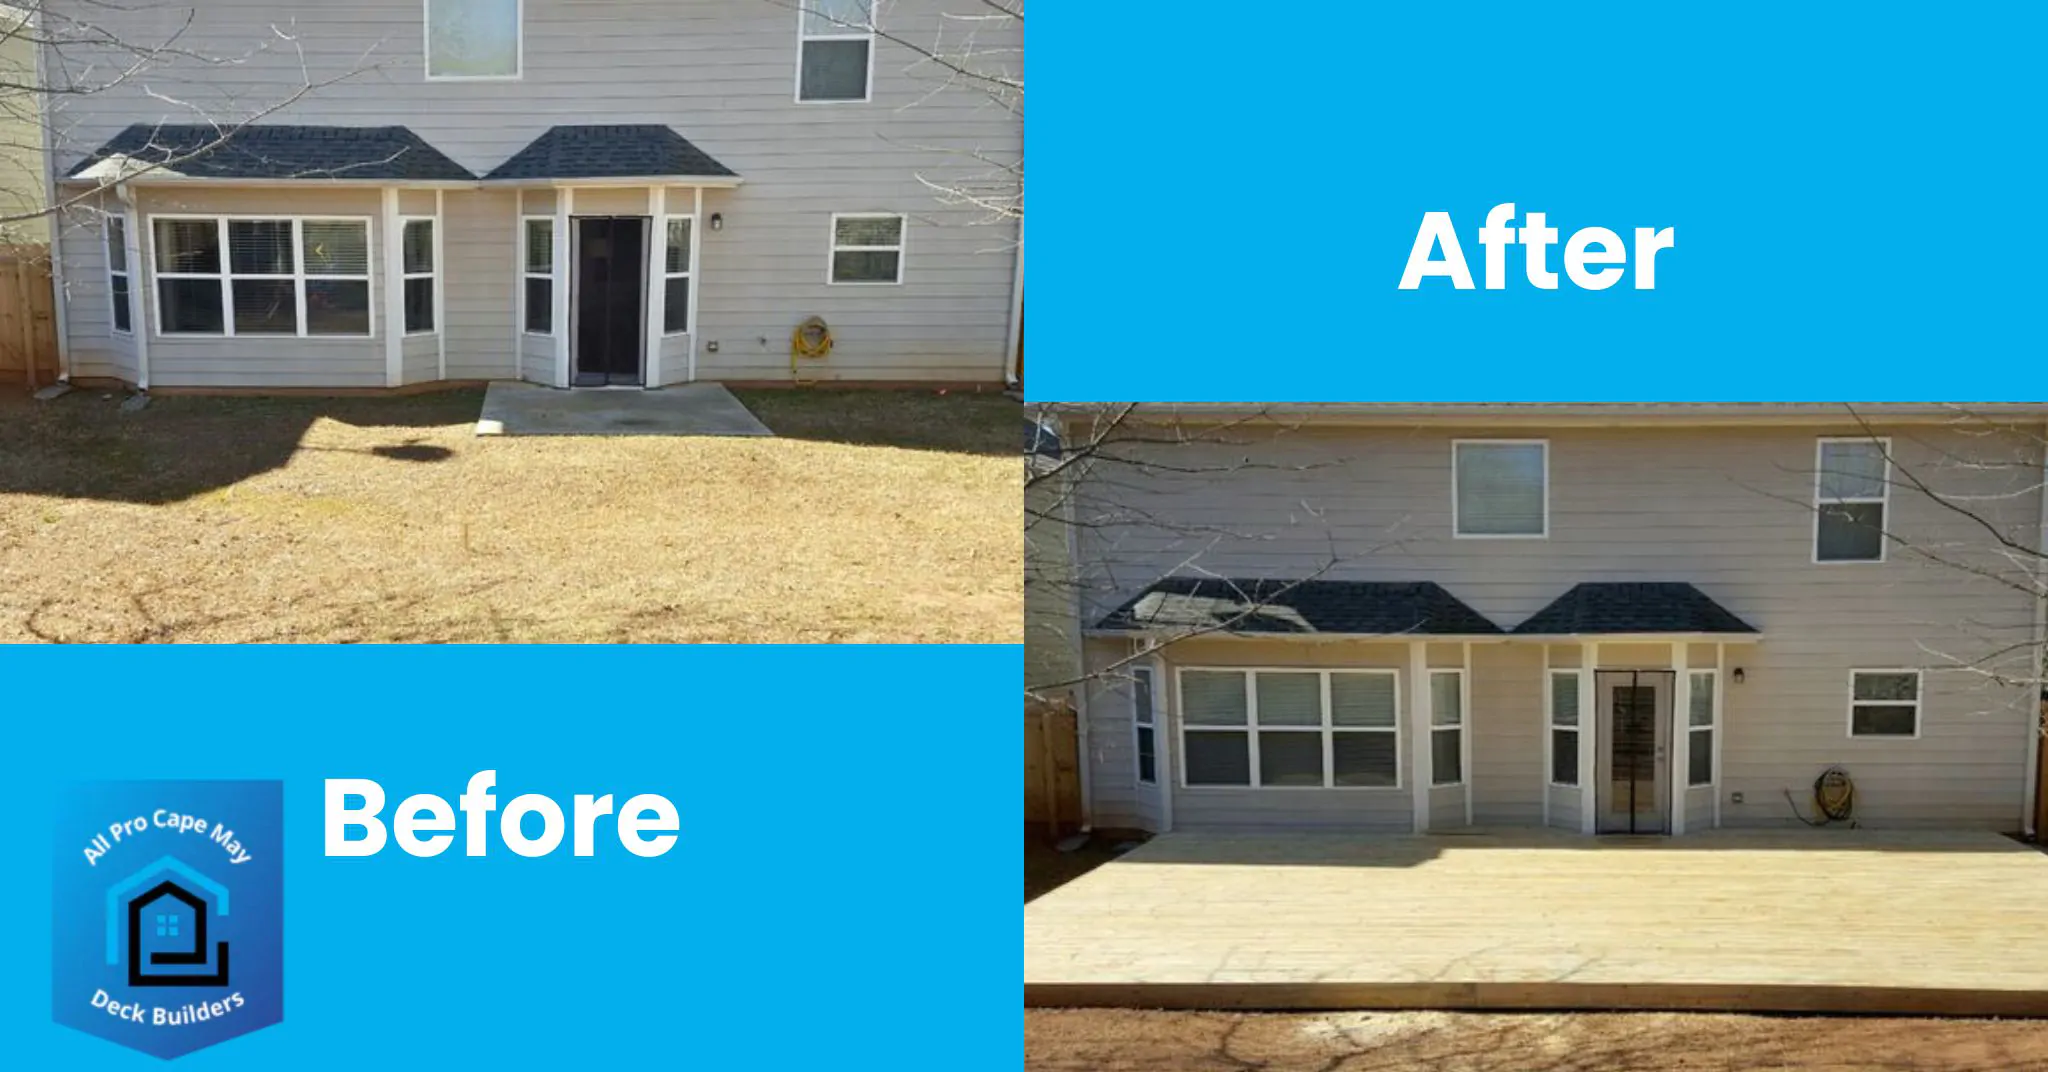 Before and After Patios and Hardscapes Installation Service - All Pro Cape May Deck Builders